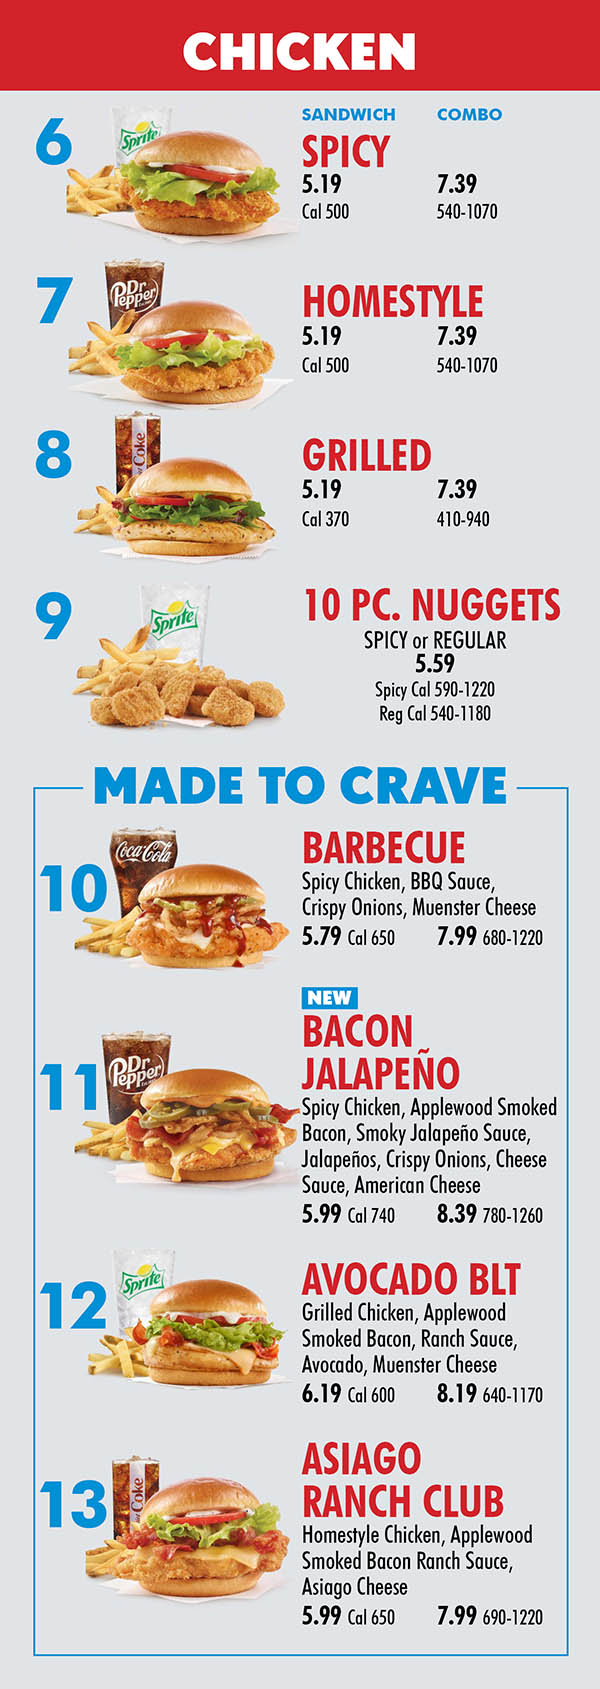 Wendy's N 84th St Lincoln NE Menu Page 2
CHICKEN
6
MADE TO CRAVE
10
11
12
7
8
SANDWICH COMBO
SPICY
5.19 7.39
Cal 500 540-1070
HOMESTYLE
5.19 7.39
Cal 500 540-1070
GRILLED
5.19 7.39
Cal 370 410-940
10 PC. NUGGETS
SPICY or REGULAR
5.59
Spicy Cal 590-1220
Reg Cal 540-1180
BARBECUE
Spicy Chicken, BBQ Sauce,
Crispy Onions, Muenster Cheese
5.79 Cal 650 7.99 680-1220
BACON
JALAPEÑO
Spicy Chicken, Applewood Smoked Bacon, Smoky Jalapeño Sauce, Jalapeños, Crispy Onions, Cheese Sauce, American Cheese
5.99 Cal 740 8.39 780-1260
AVOCADO BLT
Grilled Chicken, Applewood
Smoked Bacon, Ranch Sauce,
Avocado, Muenster Cheese
6.19 Cal 600 8.19 640-1170
ASIAGO
RANCH CLUB
Homestyle Chicken, Applewood
Smoked Bacon Ranch Sauce,
Asiago Cheese
5.99 Cal 650 7.99 690-1220